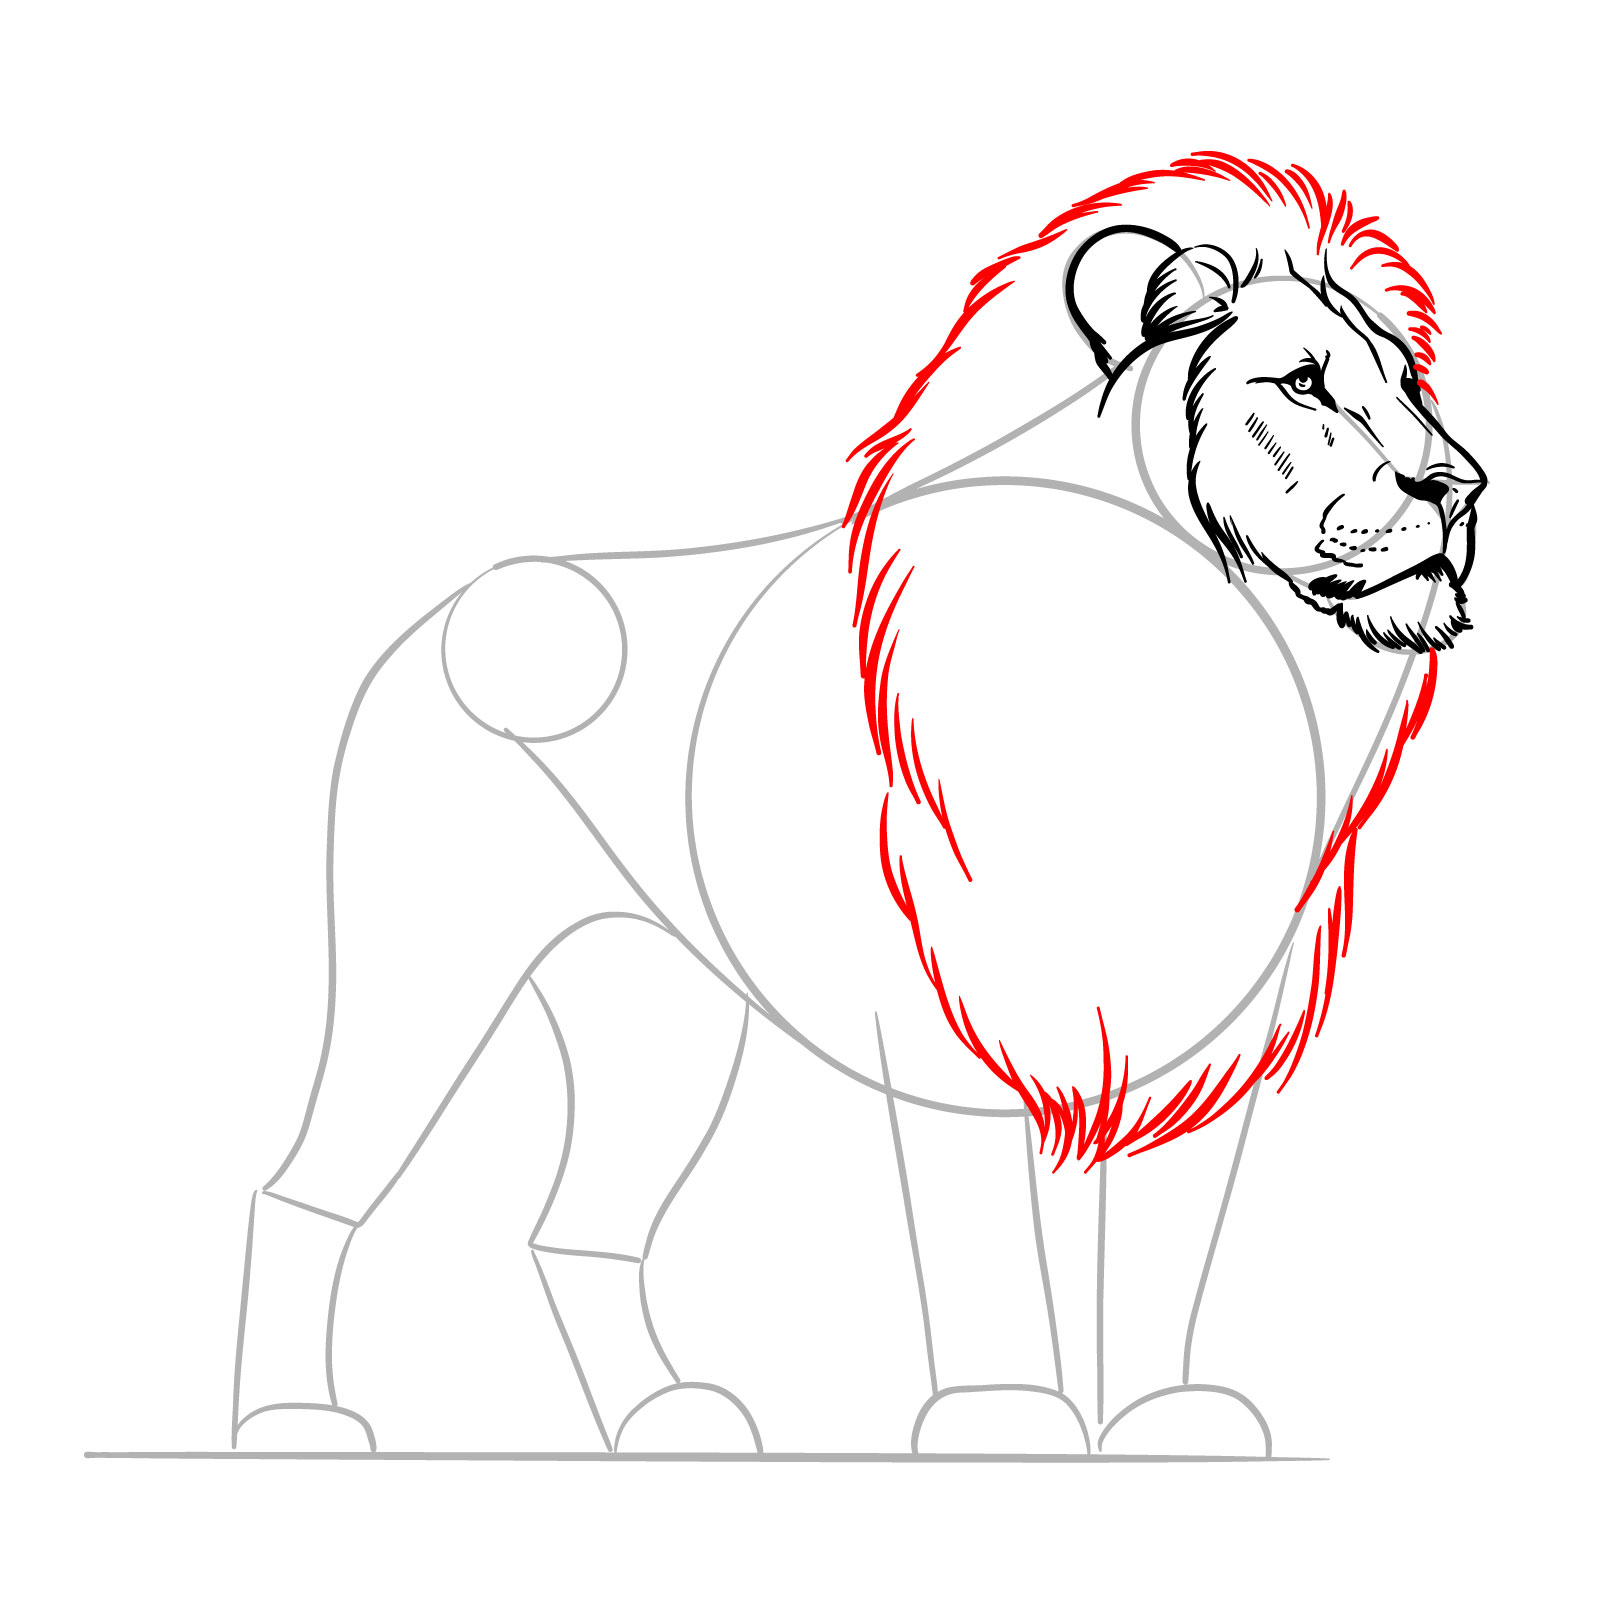 Mane outline for a forward-facing lion in a step-by-step drawing guide - step 08